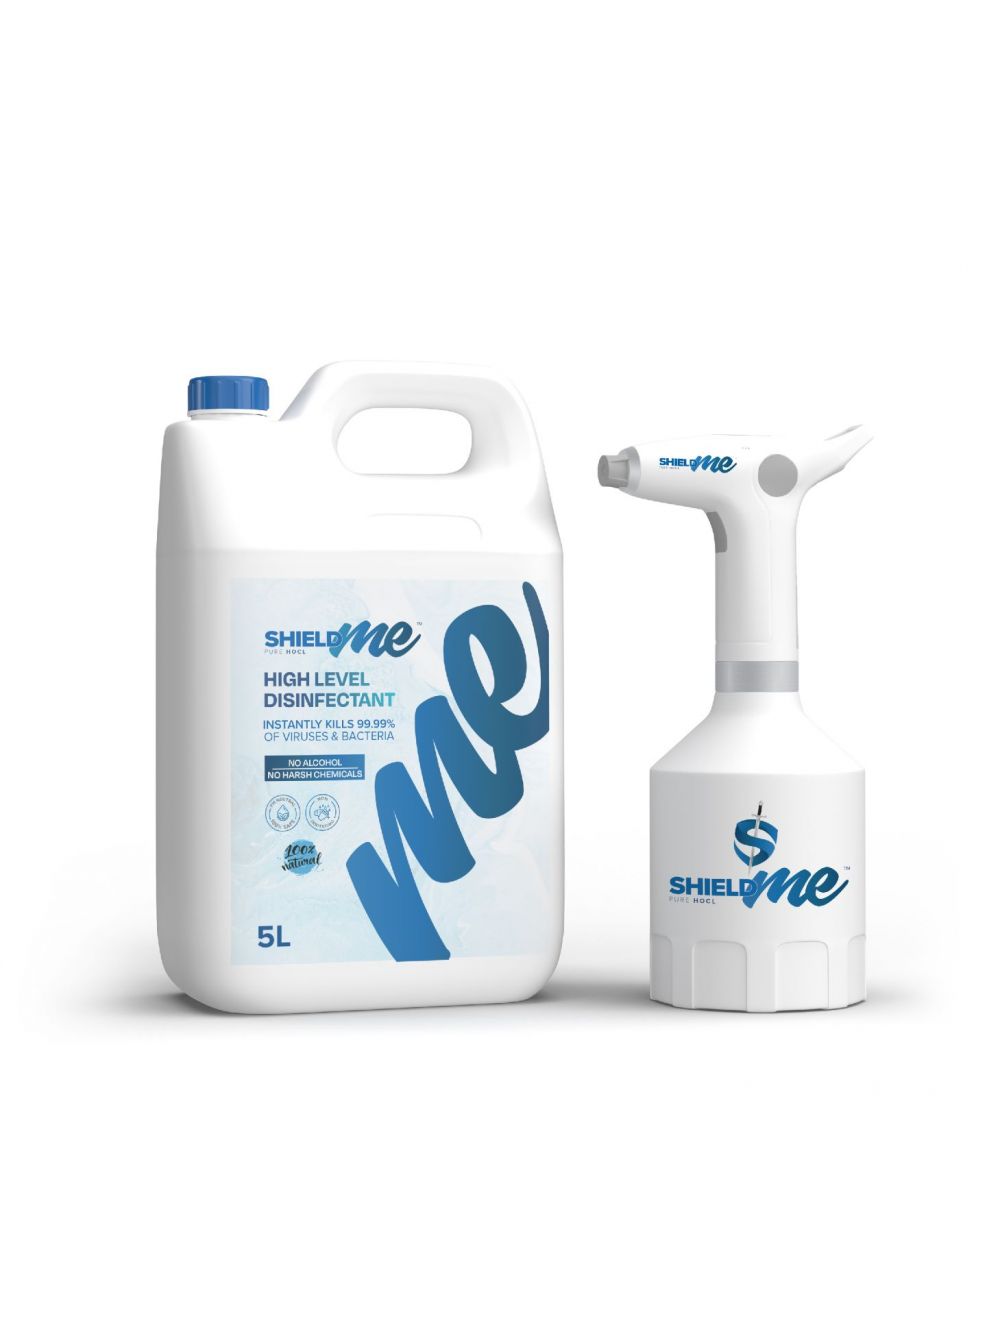 SHIELDme Handheld Compact Spray Machine & 5 Litres High level Sanitizer & Disinfectant -9H-7GFN-Z44O